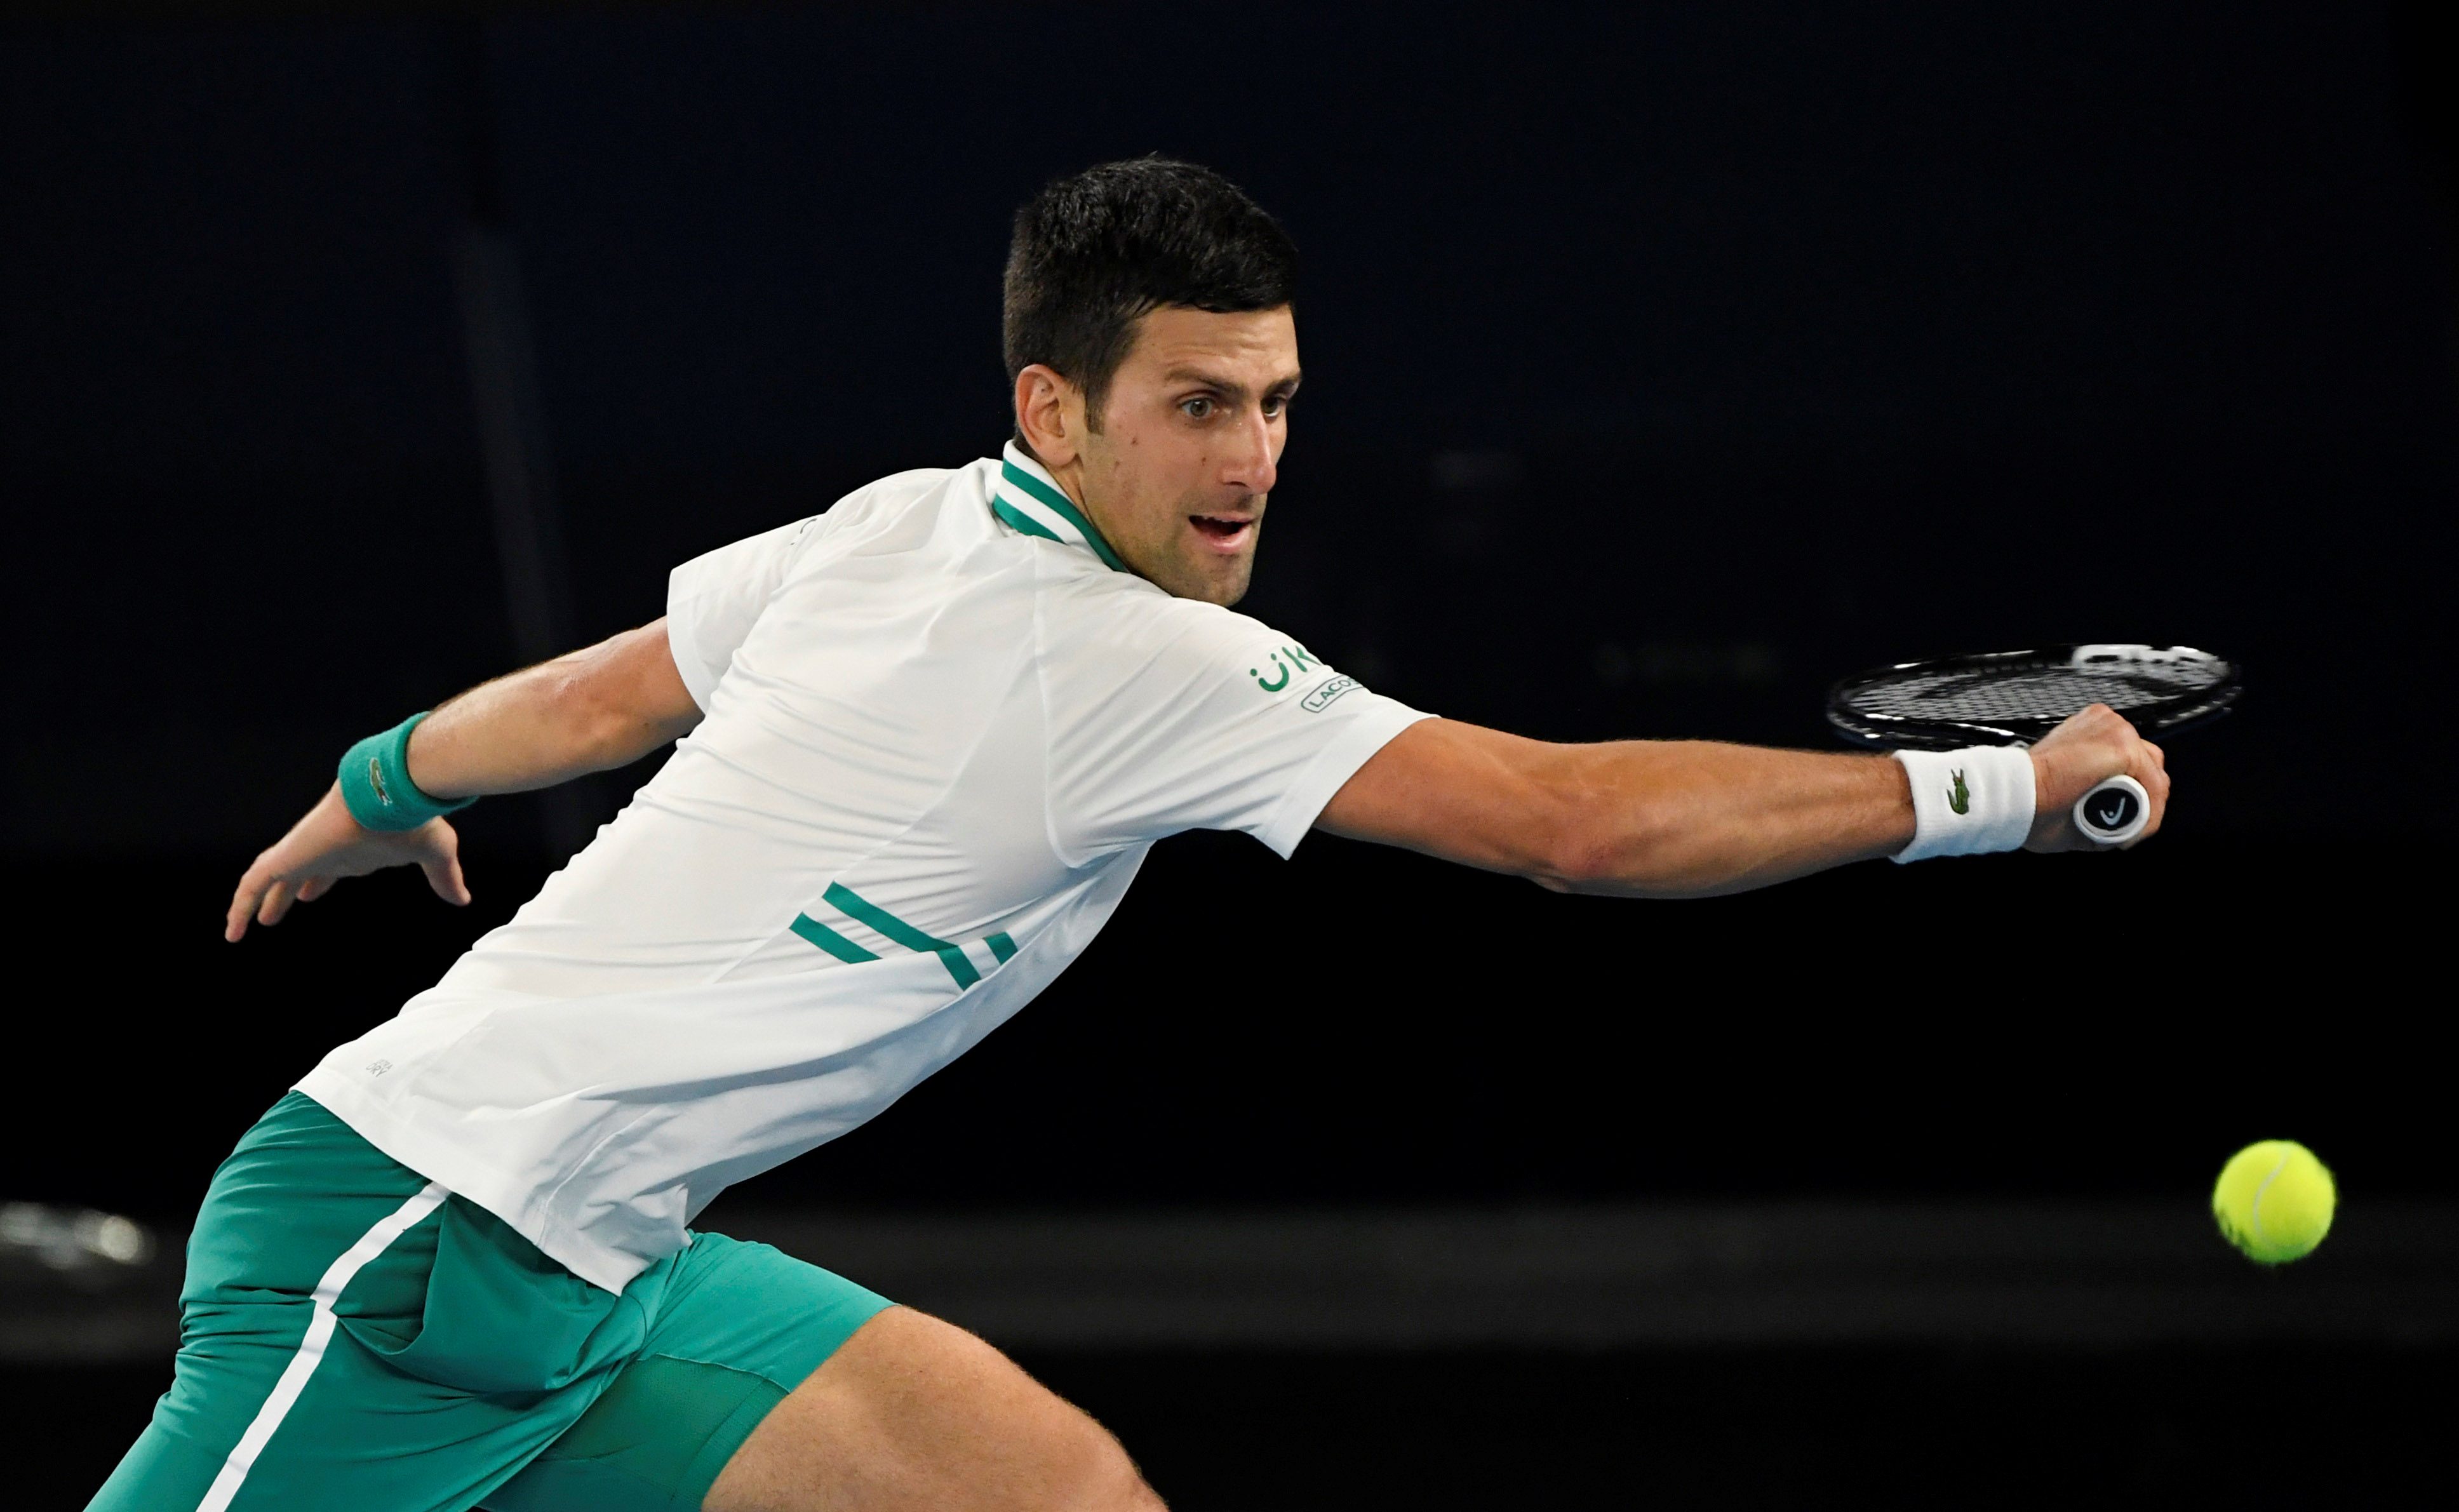 Djokovic pulls out of Miami to spend time with family